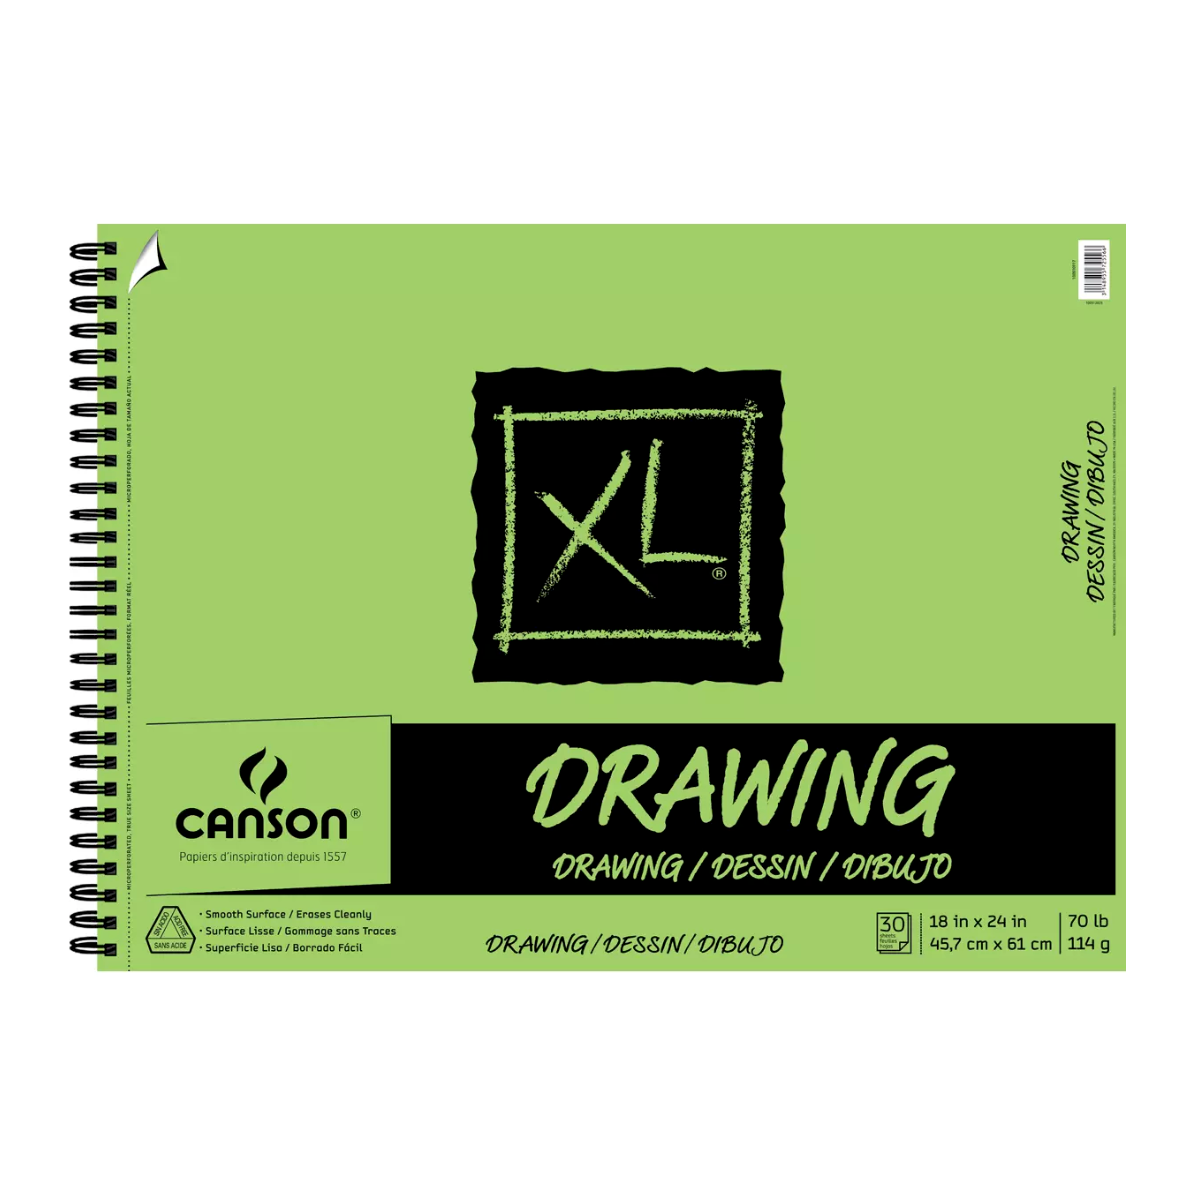 Canson - XL Drawing Pad - 11 x 14